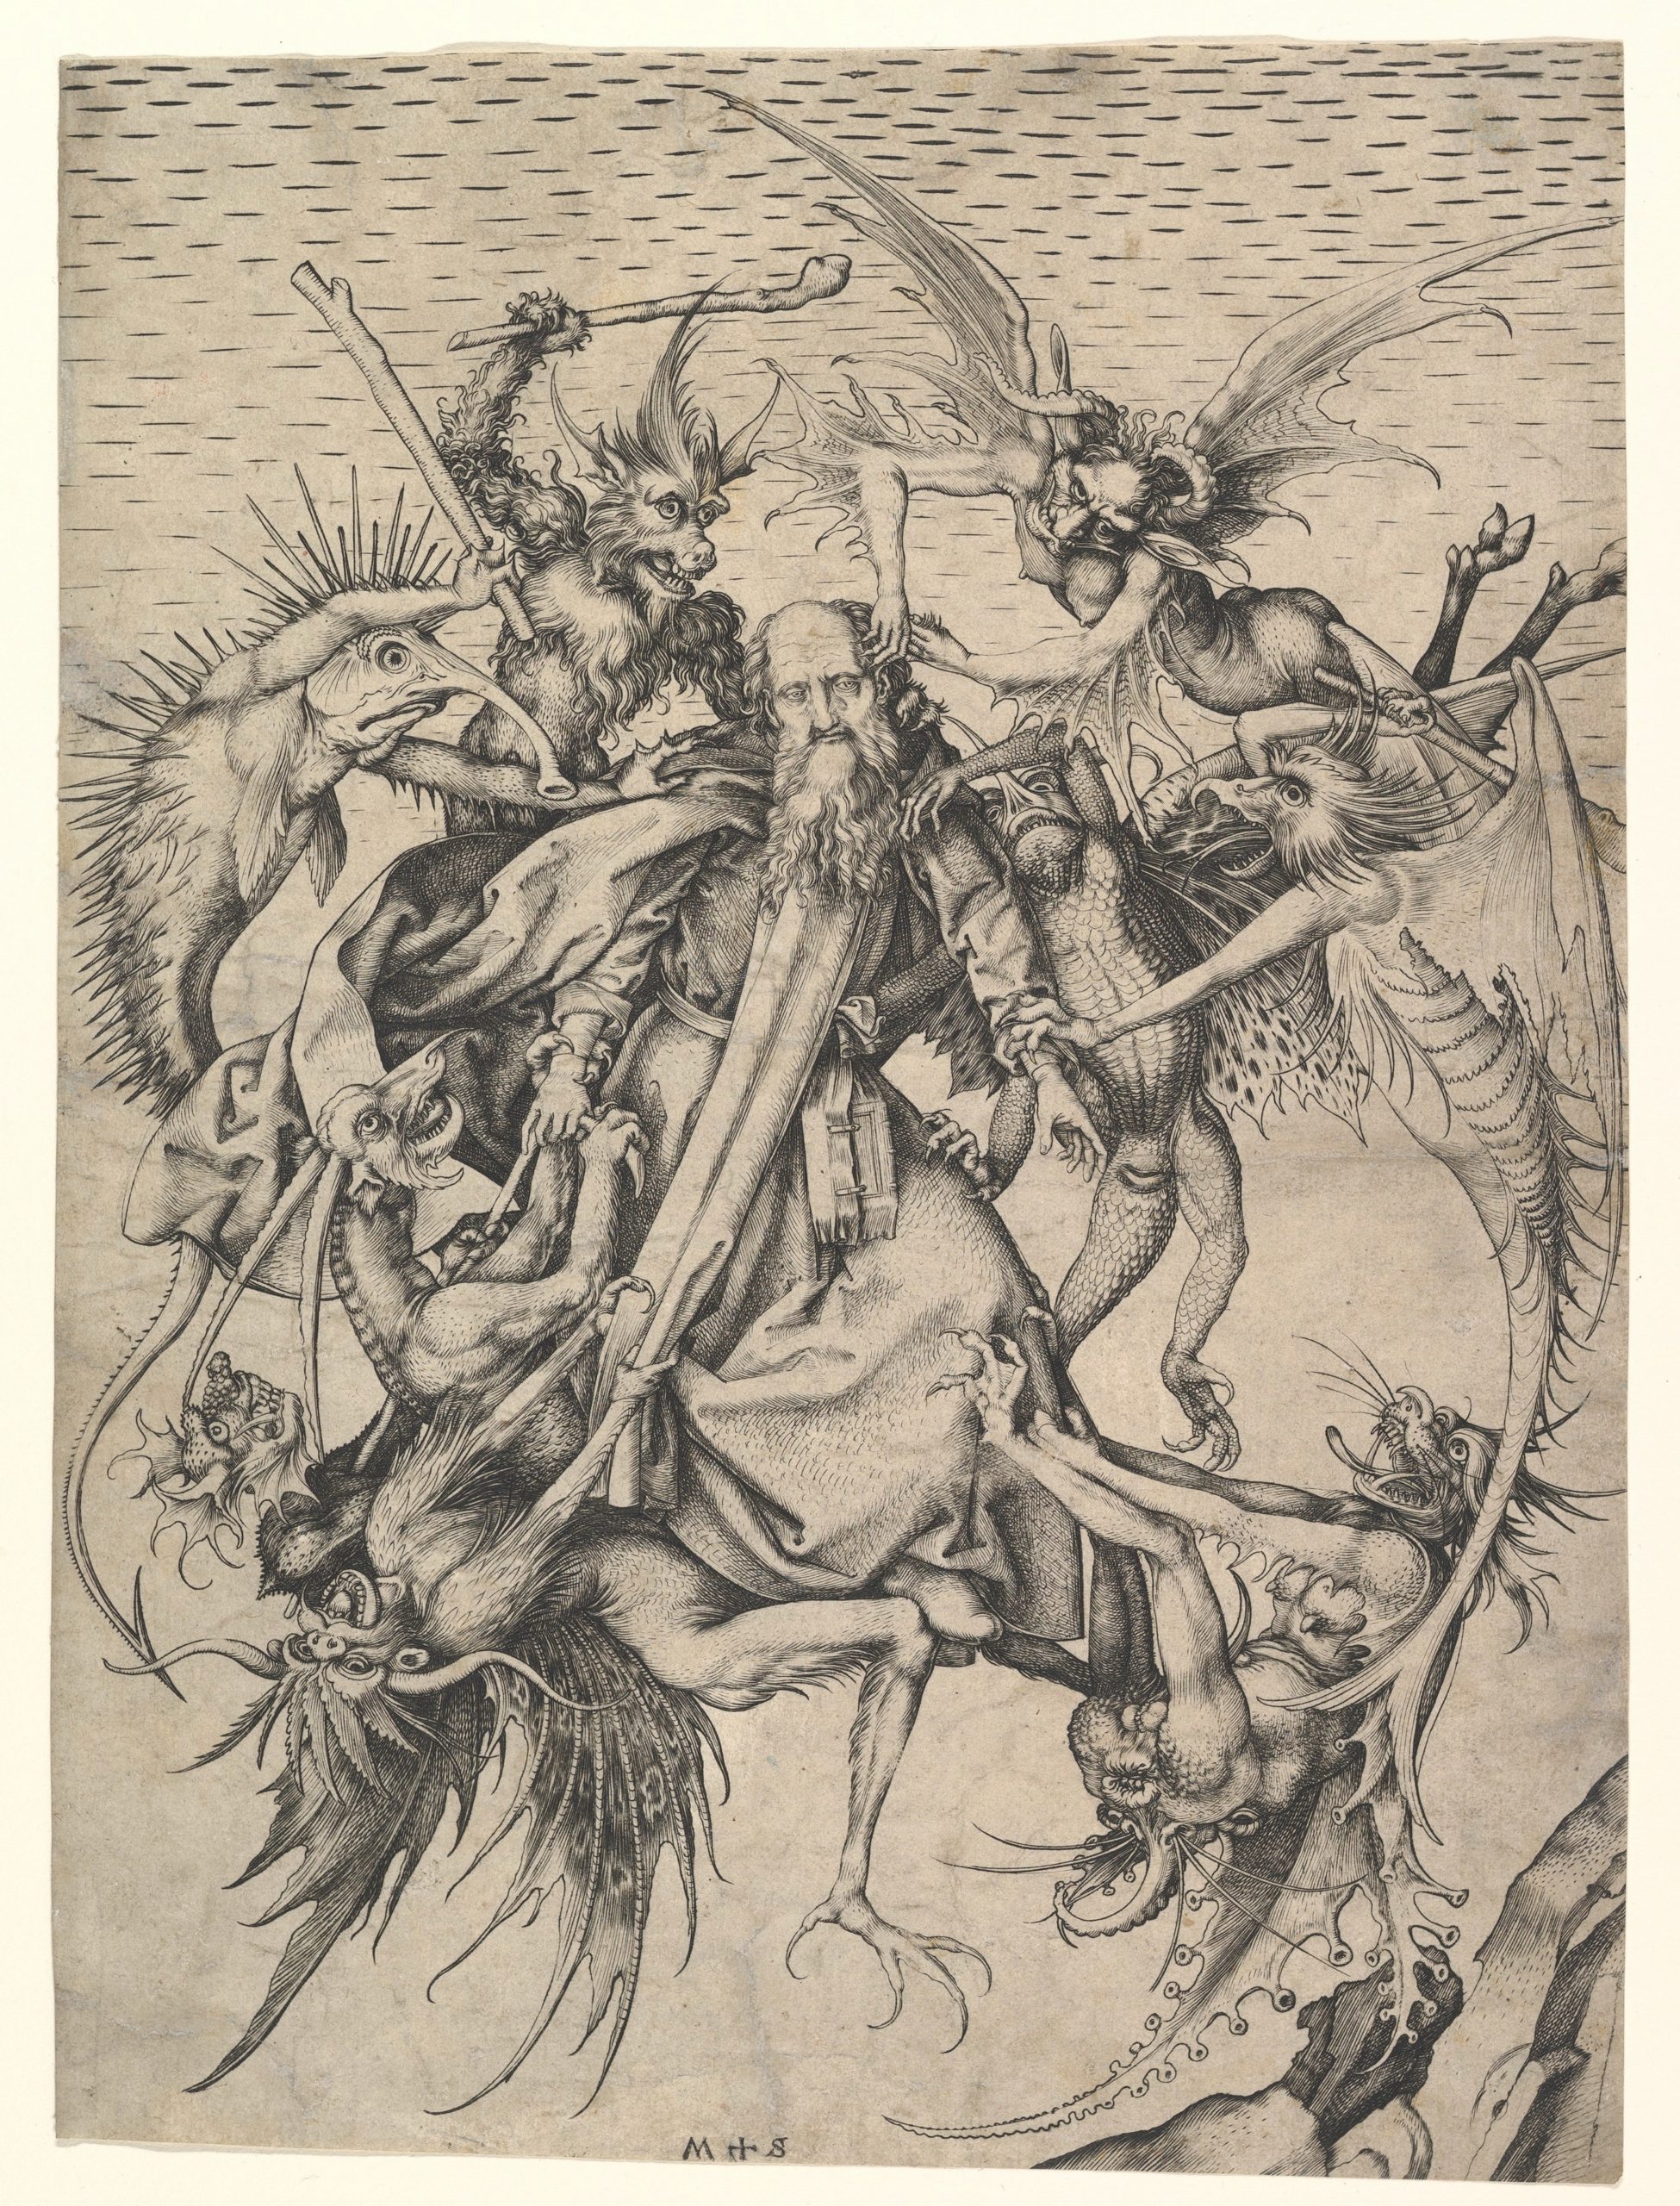 Martin Schongauer, Saint Anthony Tormented by Demons, c. 1475, engraving, 30.0 x 21.8 cm (The Metropolitan Museum of Art)